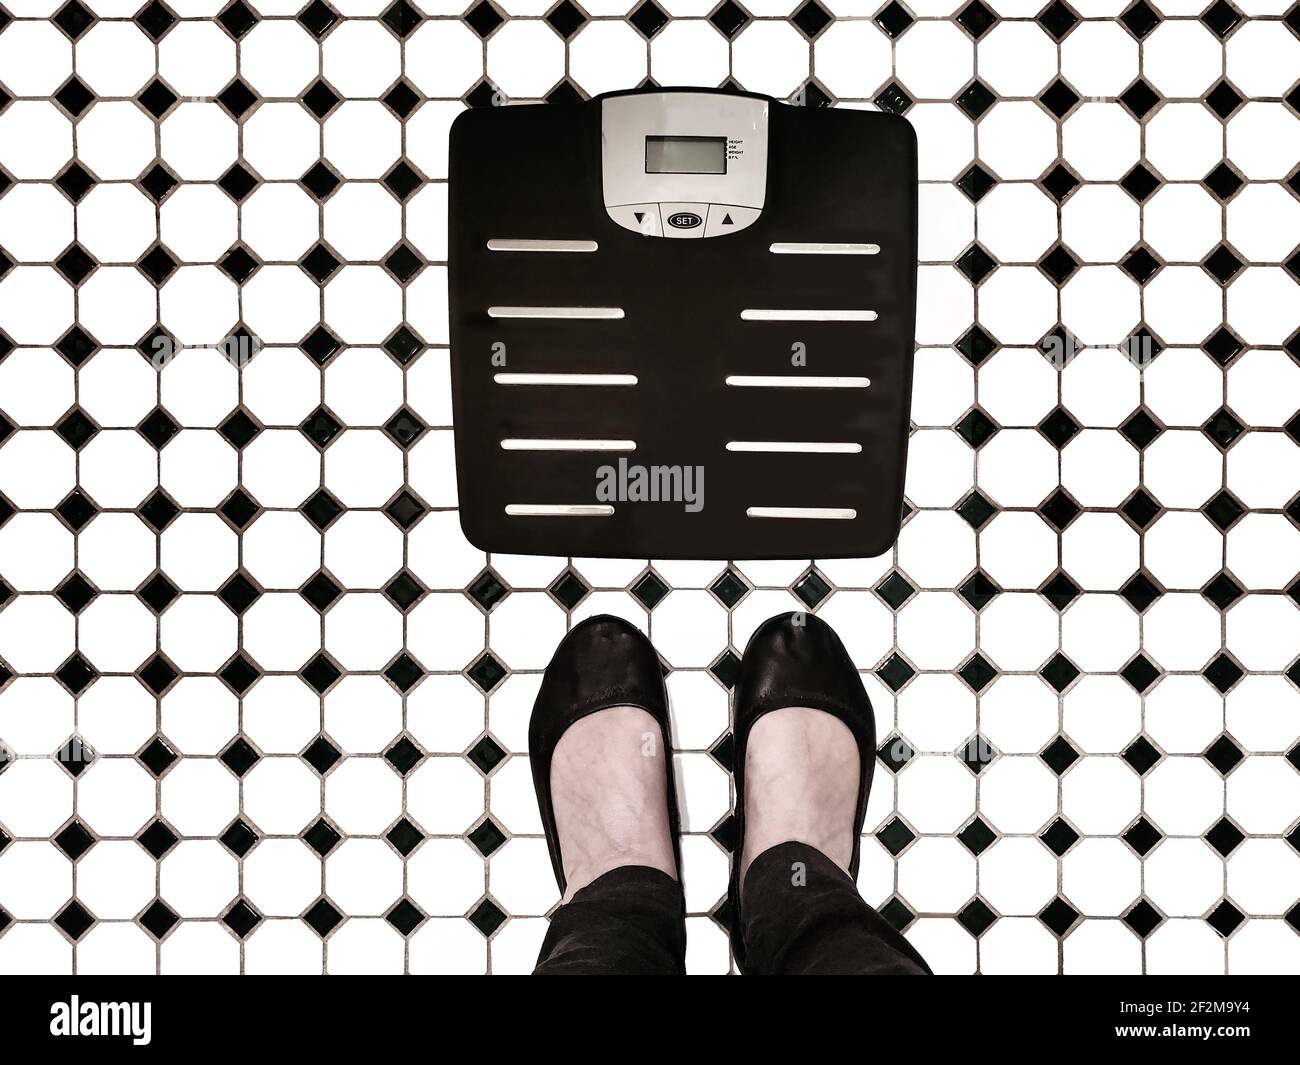 Body weight scales on tiled bathroom floor with woman's feet beside it like shes going to step on them - top view Stock Photo